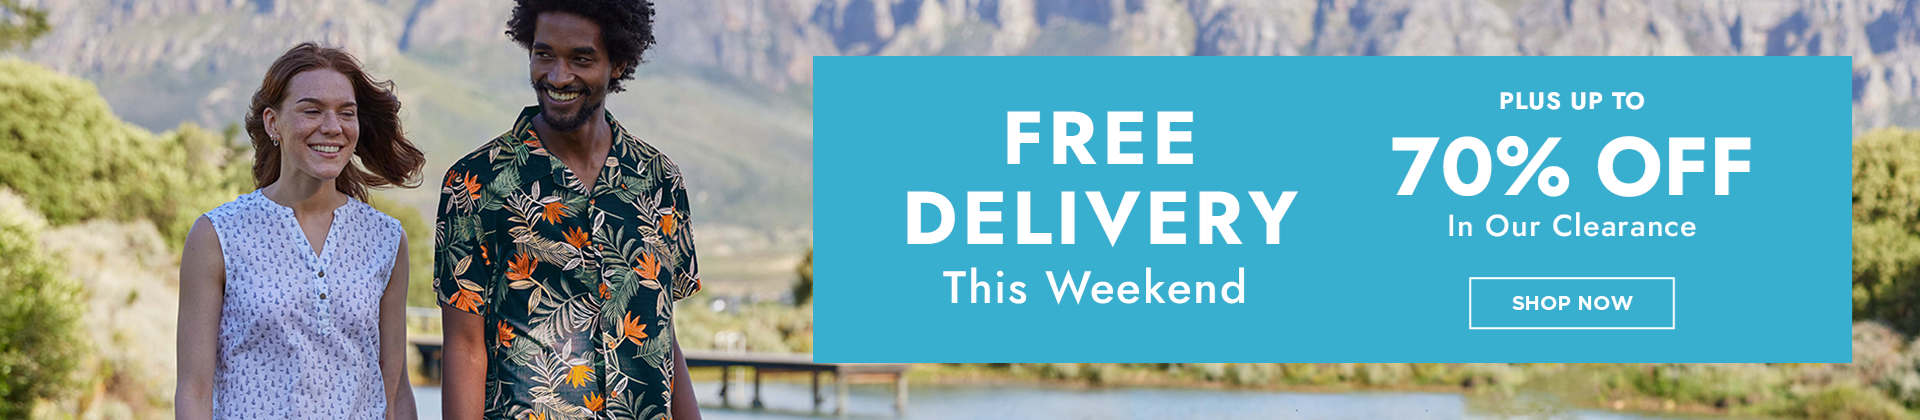 H1: FREE DELIVERY